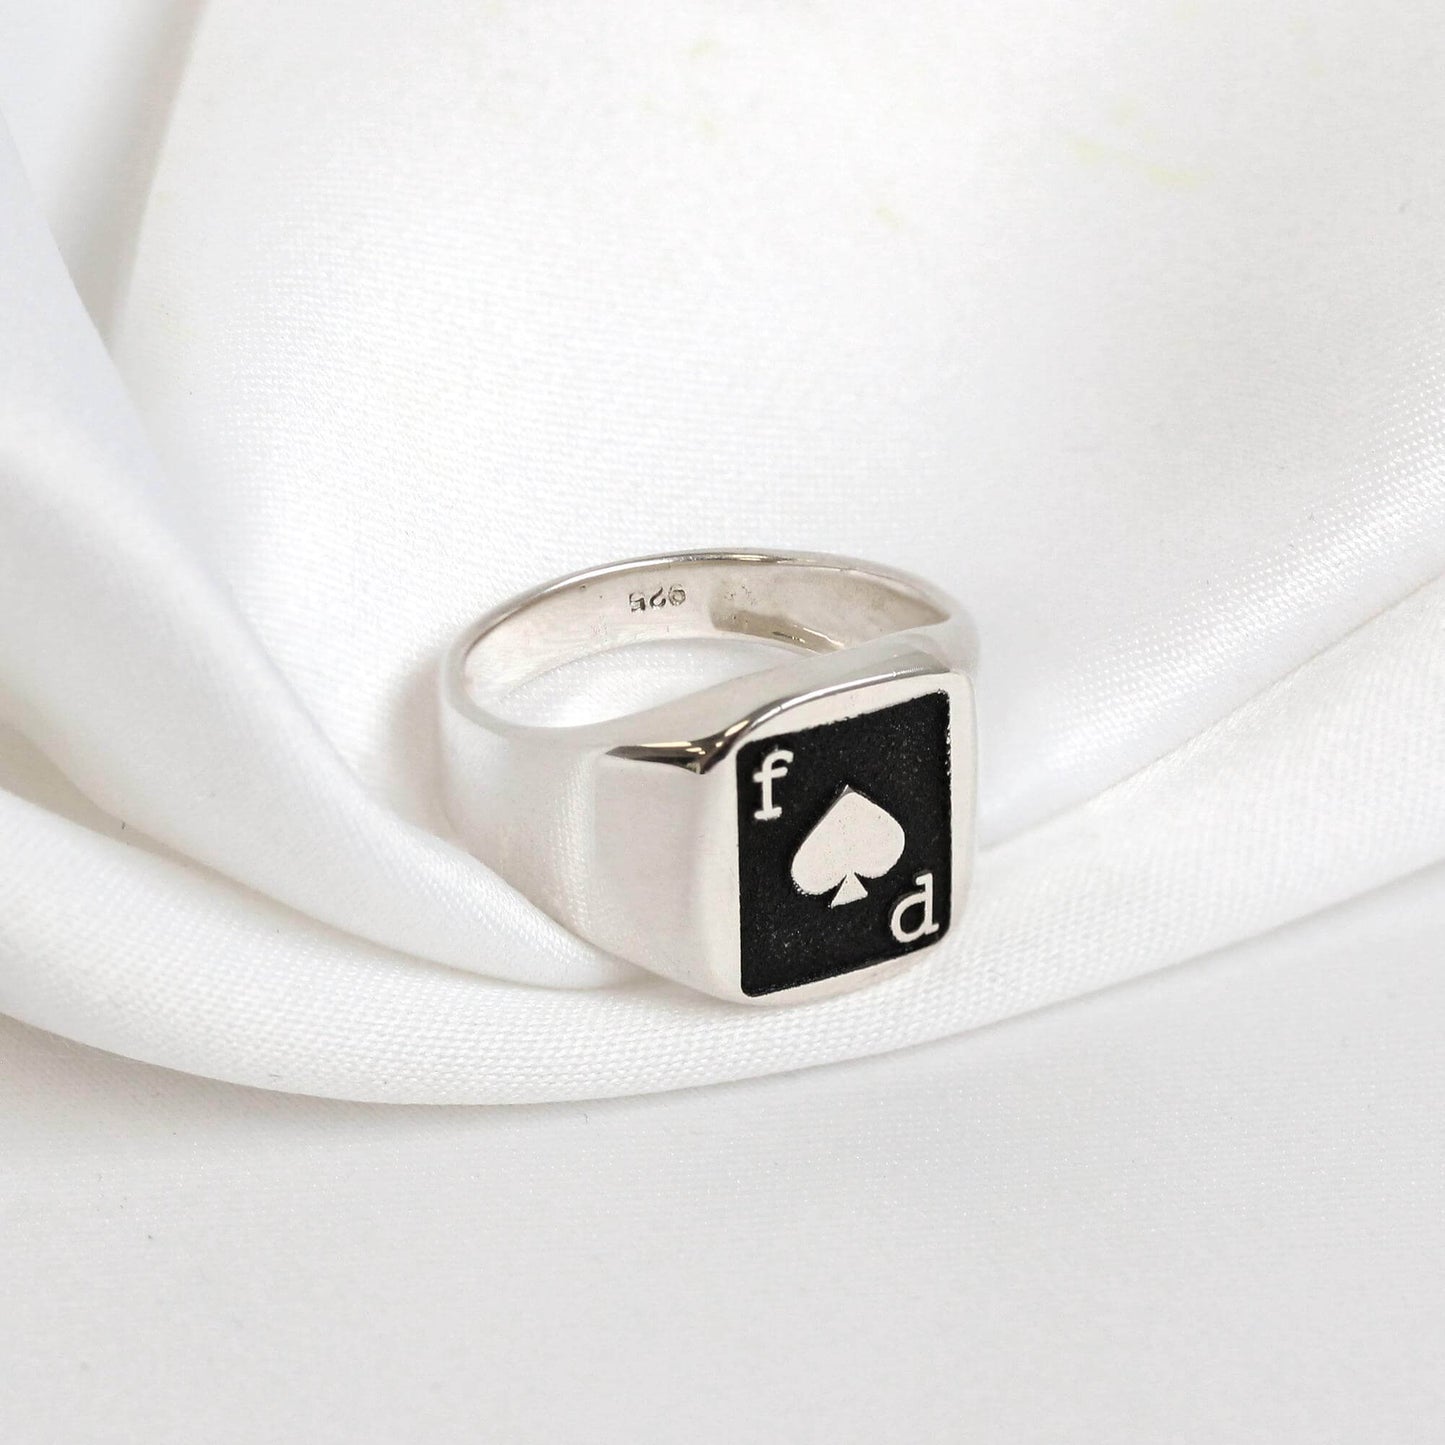 Personalised Sterling Silver Initials Playing Card Signet Ring